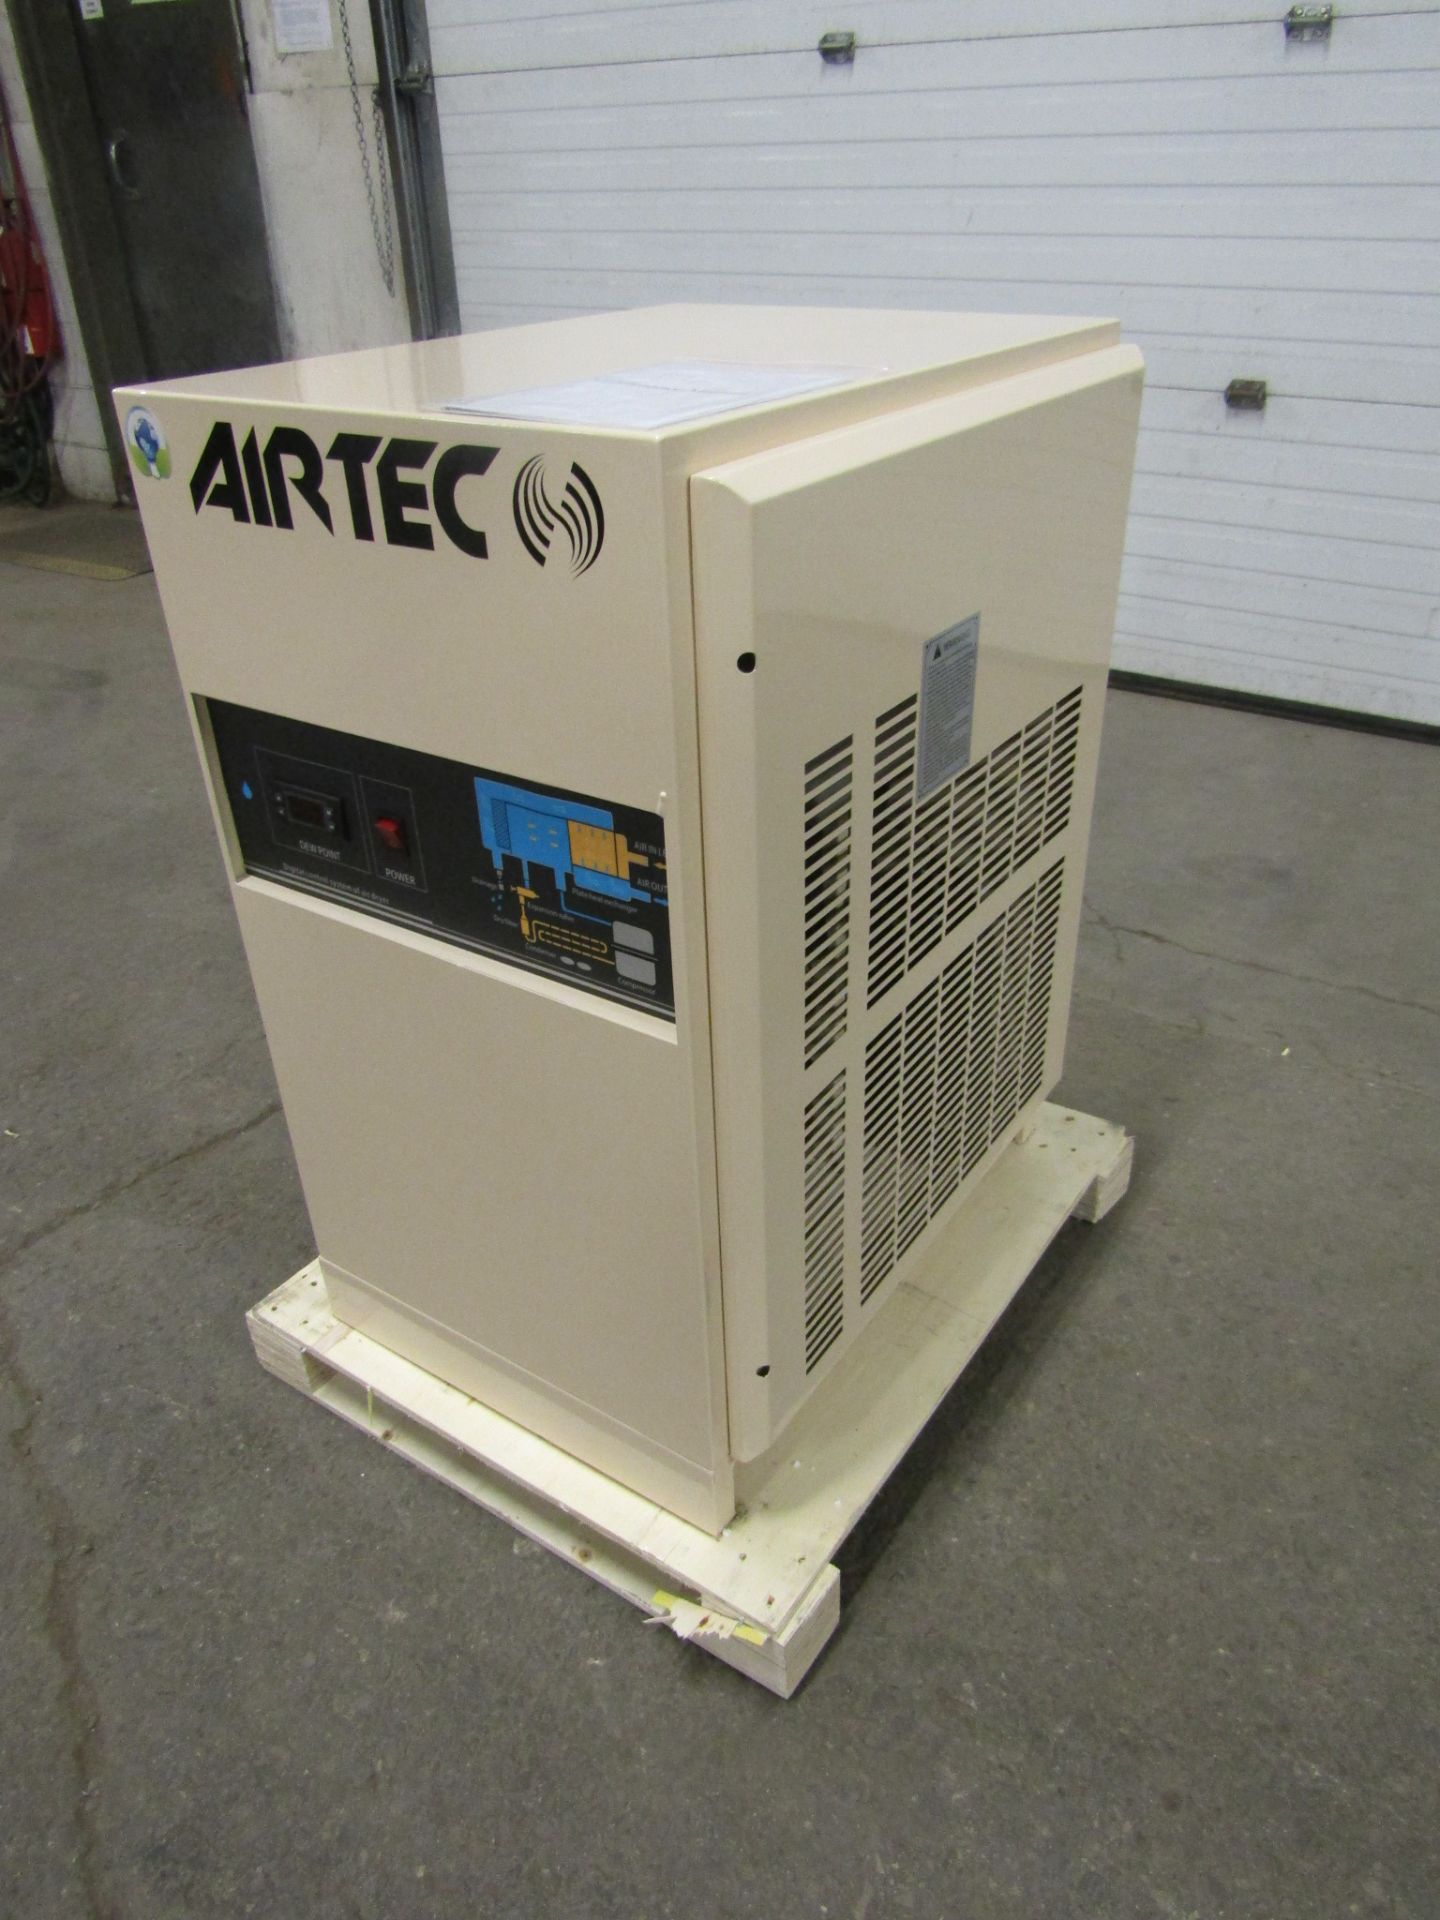 MINT Airtec Compressed Air Dryer 120CFM Unused new unit 110V 1 phase - Image 2 of 2